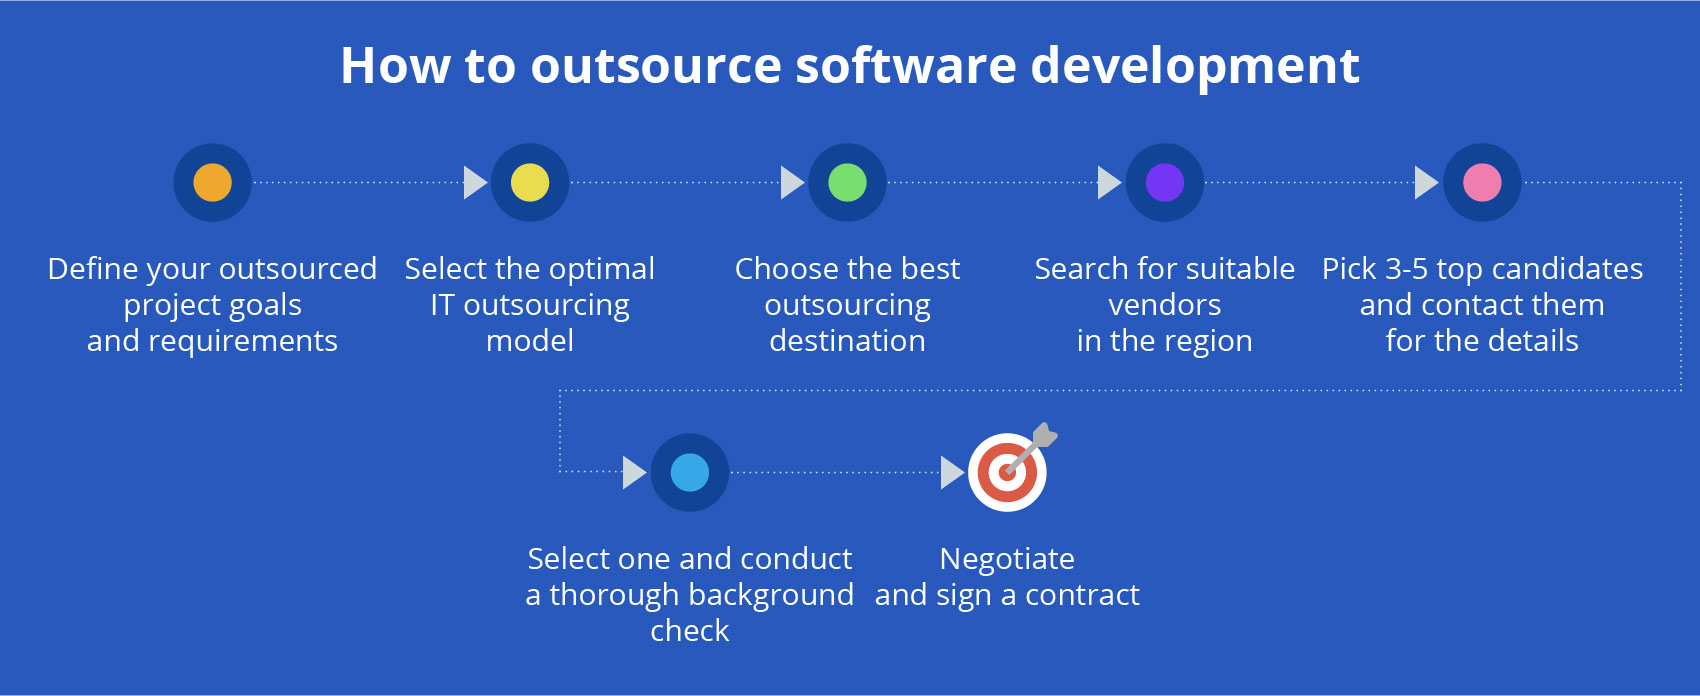 Alternative Spaces Blog Best Practices For Outsourcing Software Development In 2022